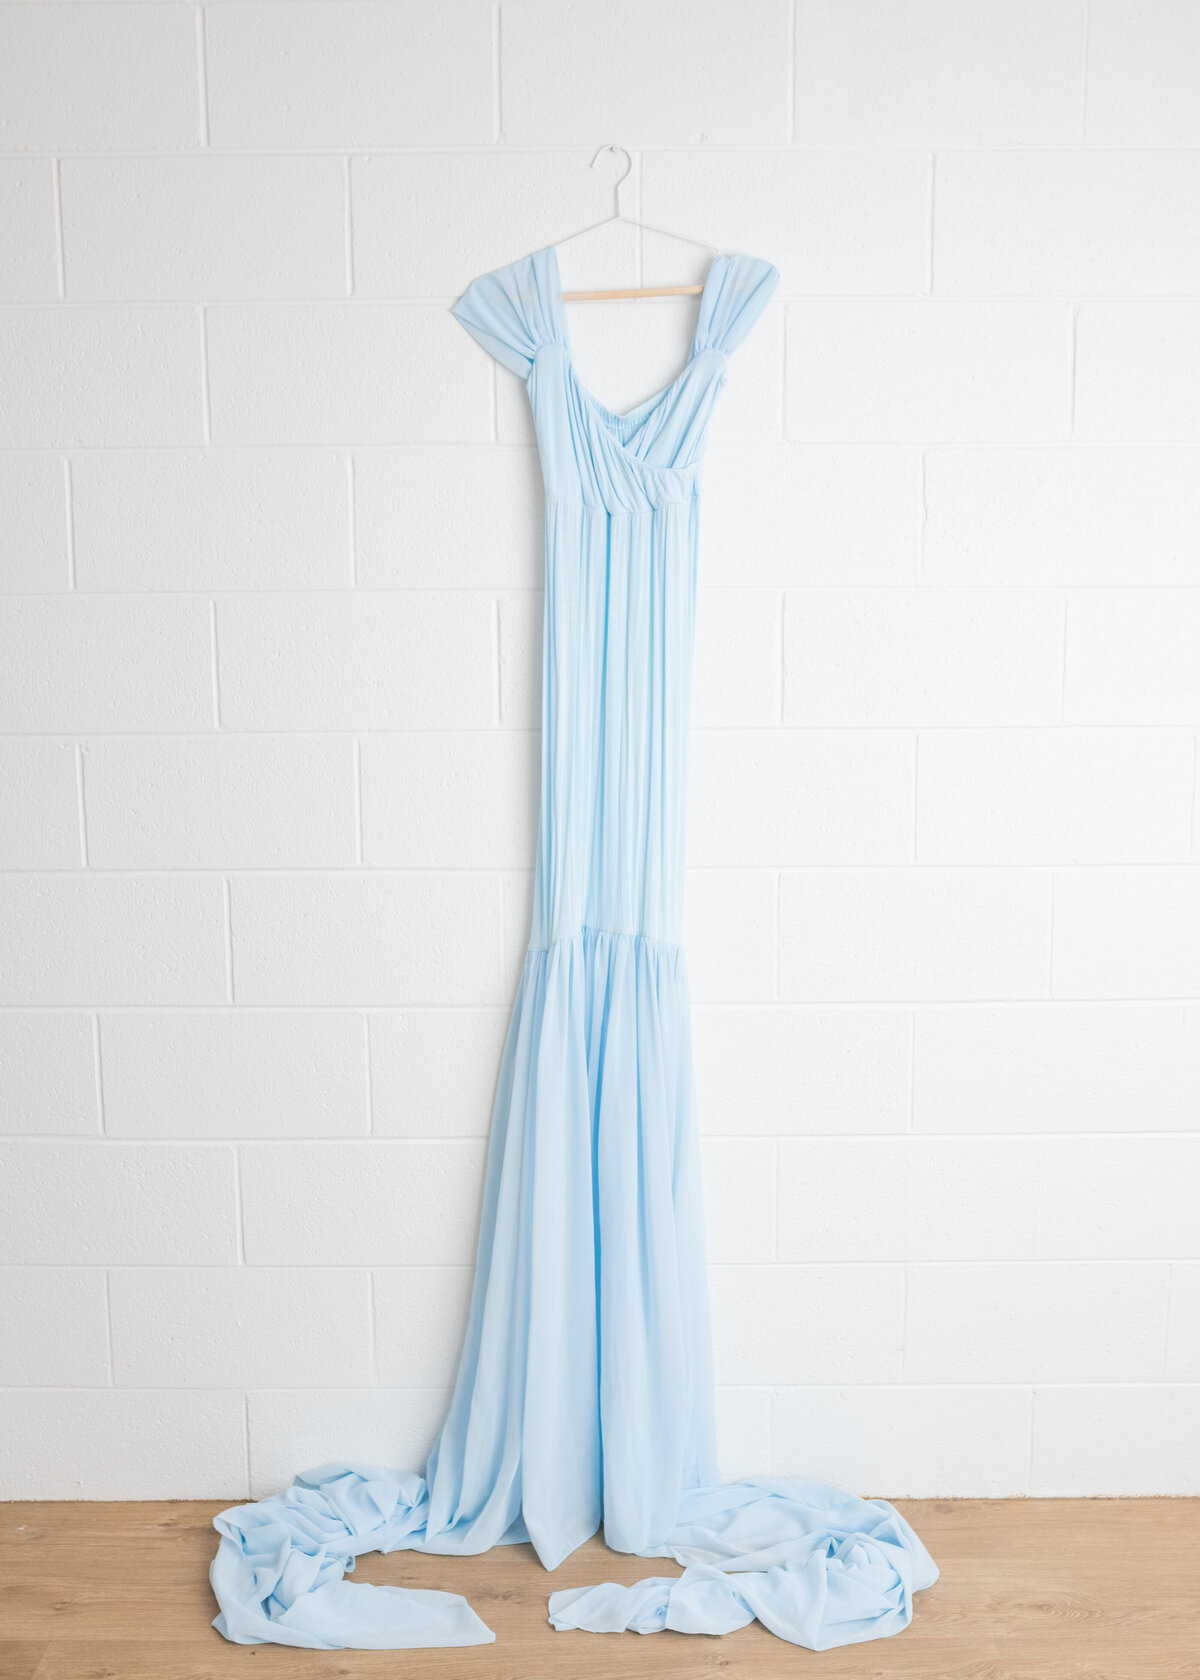 Pale Blue maternity gown by Chicaboo.  Stretch bodice and chiffon train.  Fits sizes 8-18 and available in Lauren Vanier Photography's Client Wardrobe